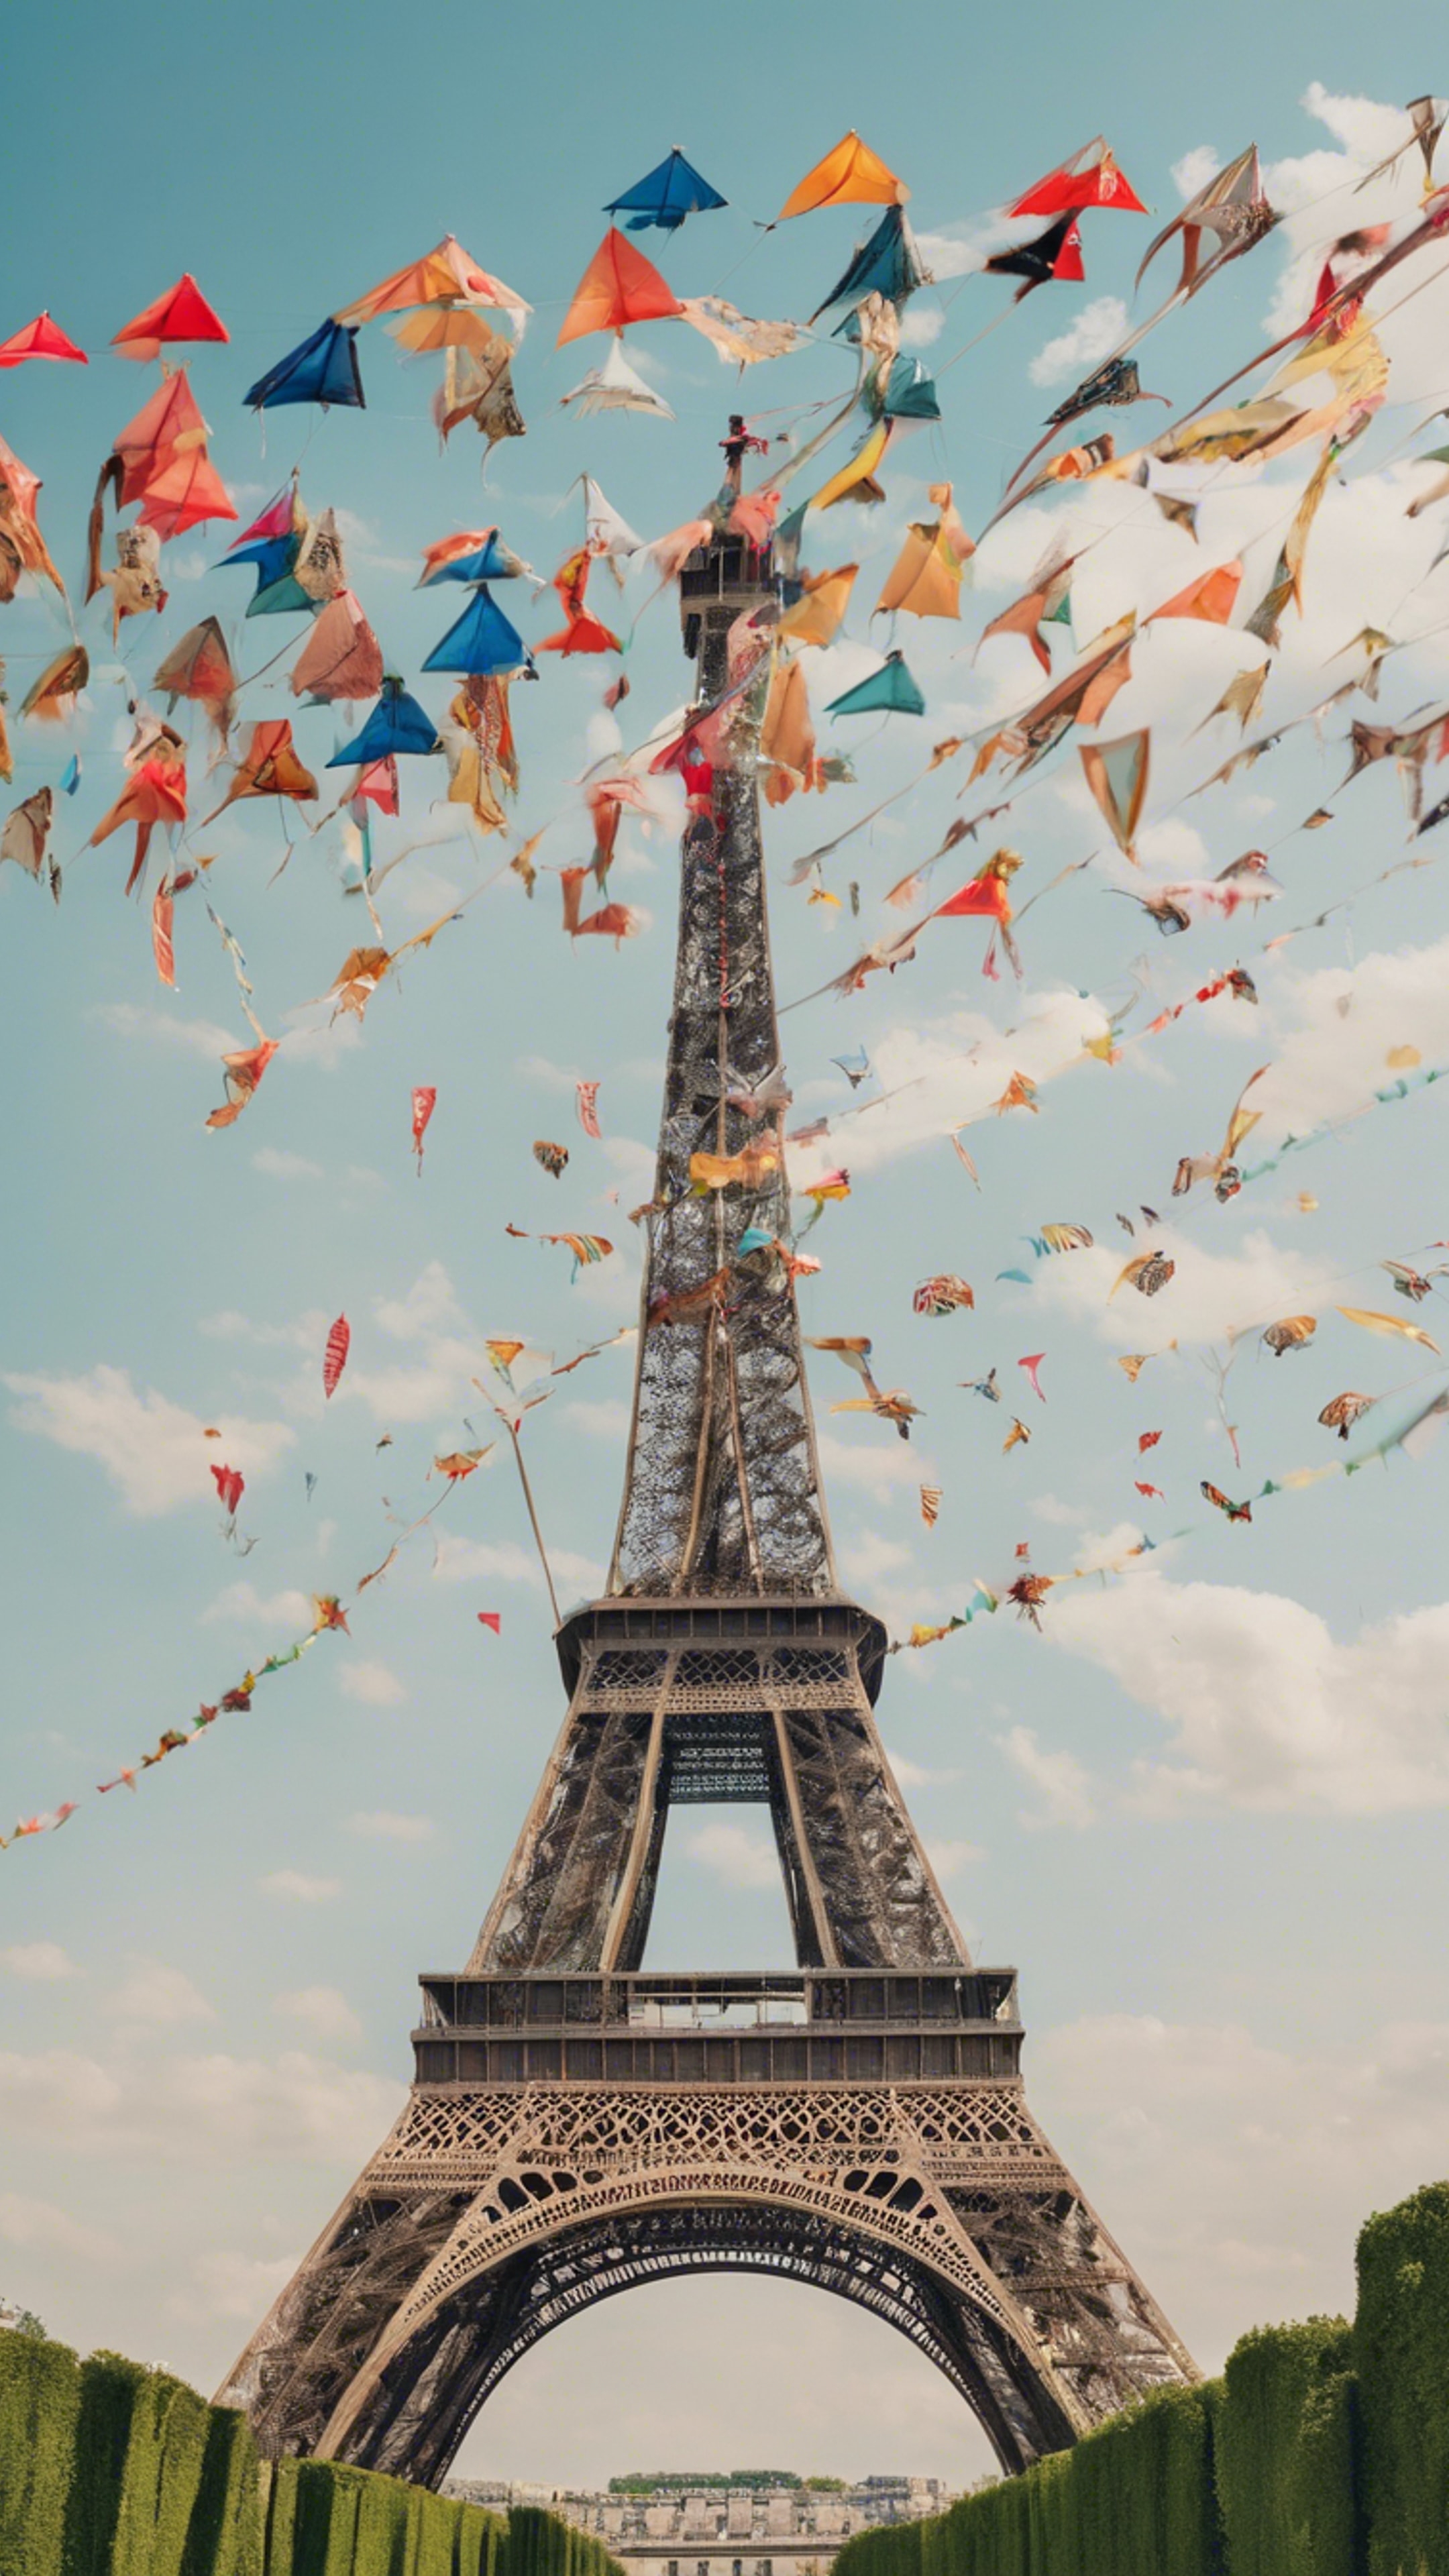 Numerous colorful kites flying around the Eiffel Tower on a breezy summer day. کاغذ دیواری[13c5a5af918a46f7995e]